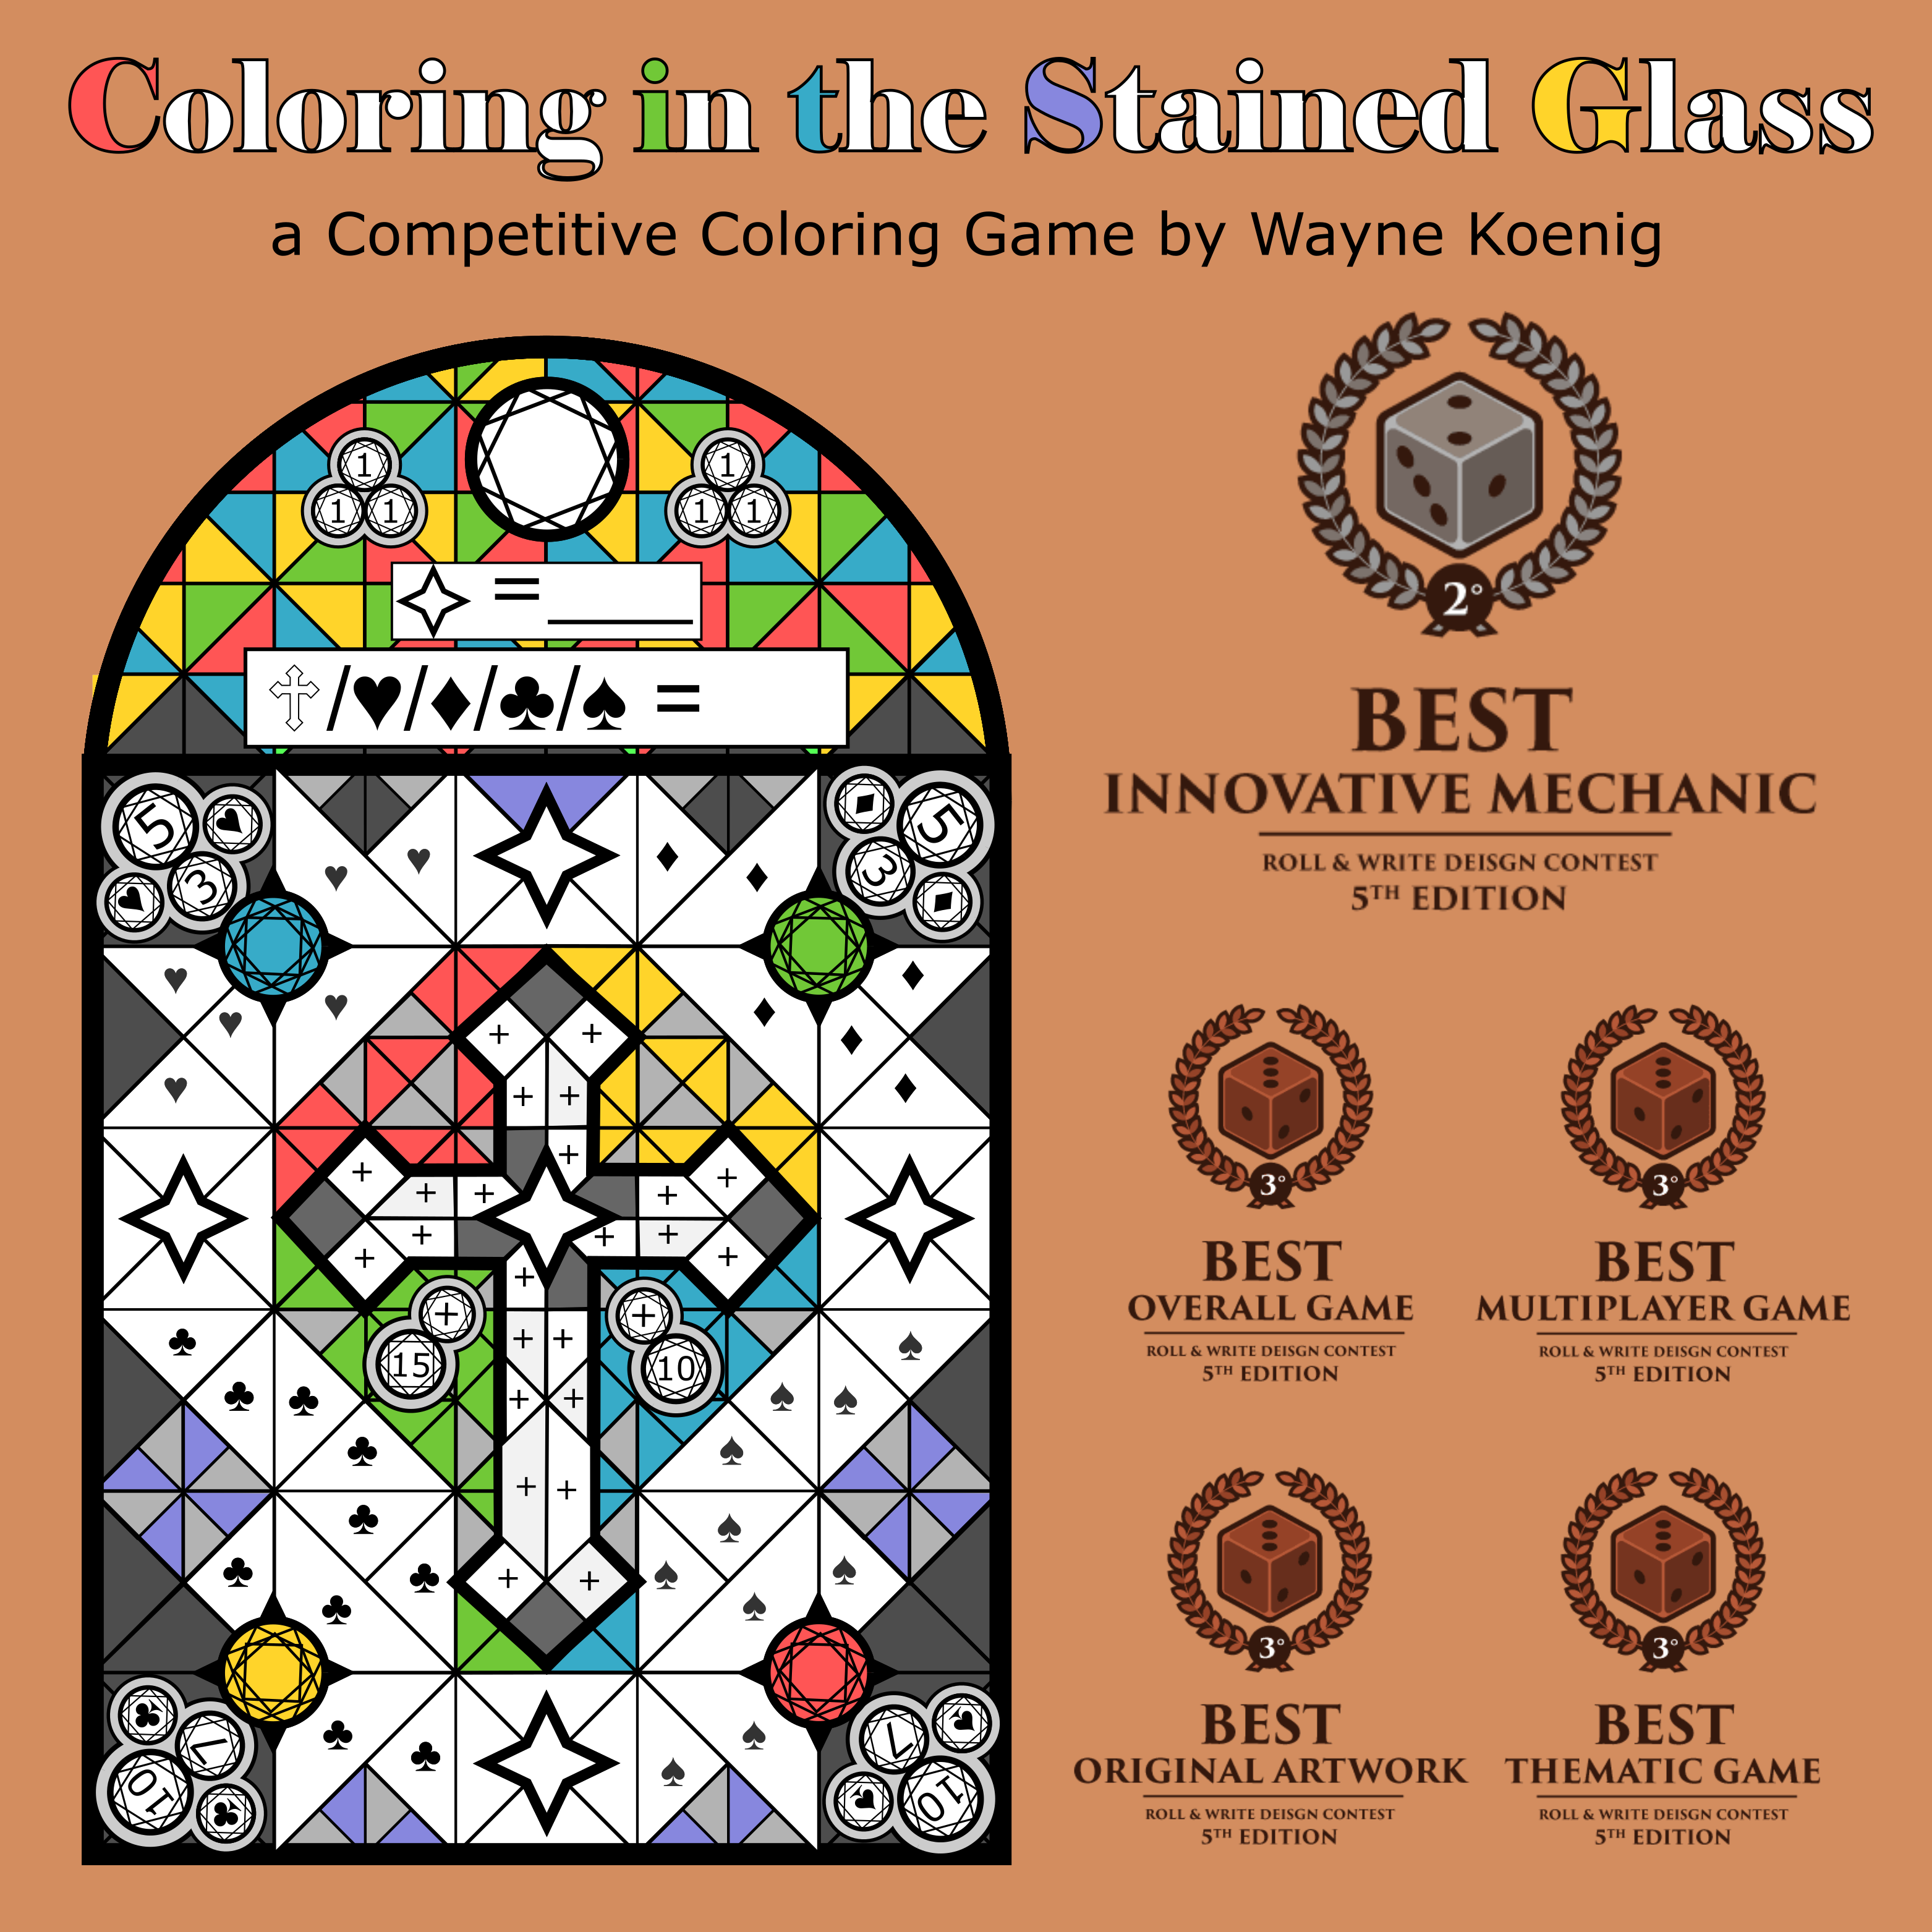 Coloring in the Stained Glass